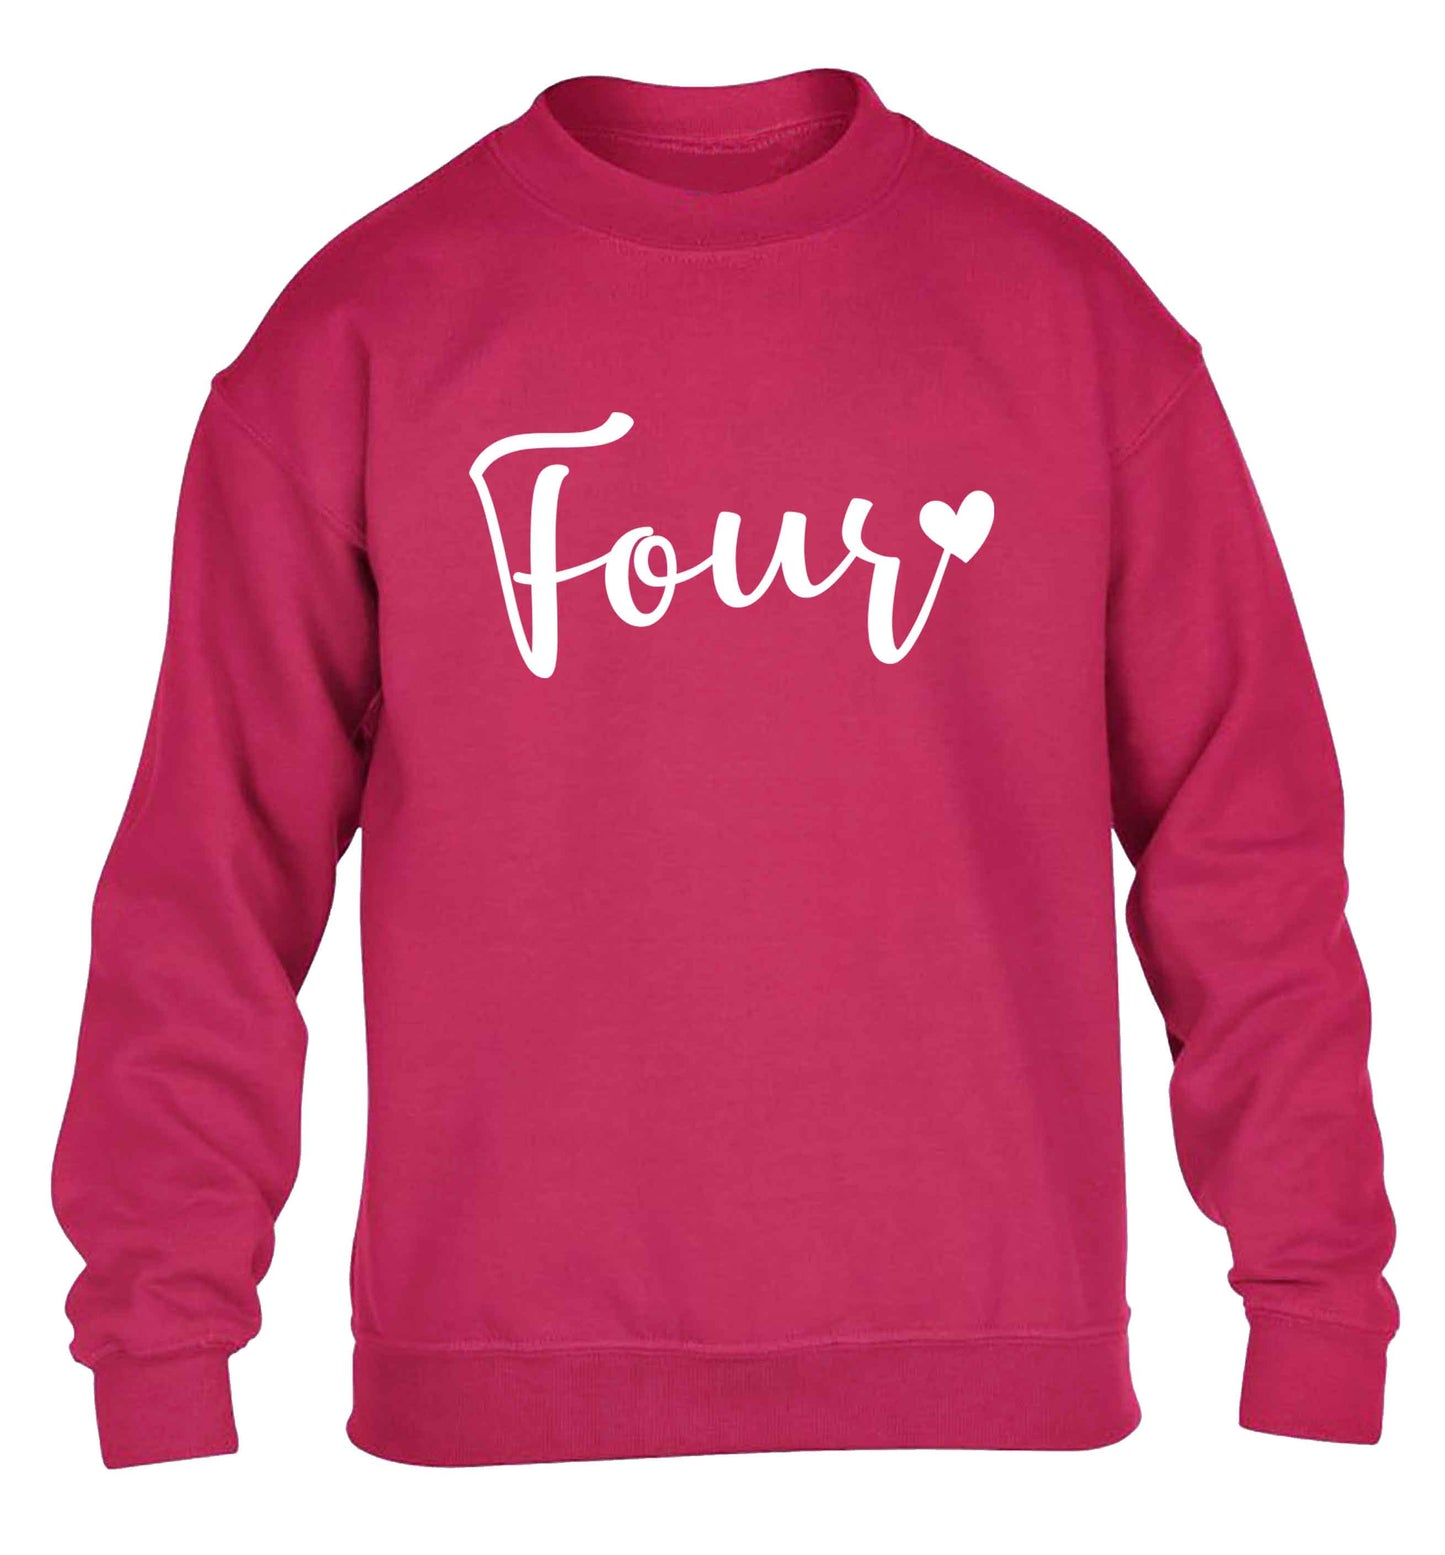 Four and heart children's pink sweater 12-13 Years